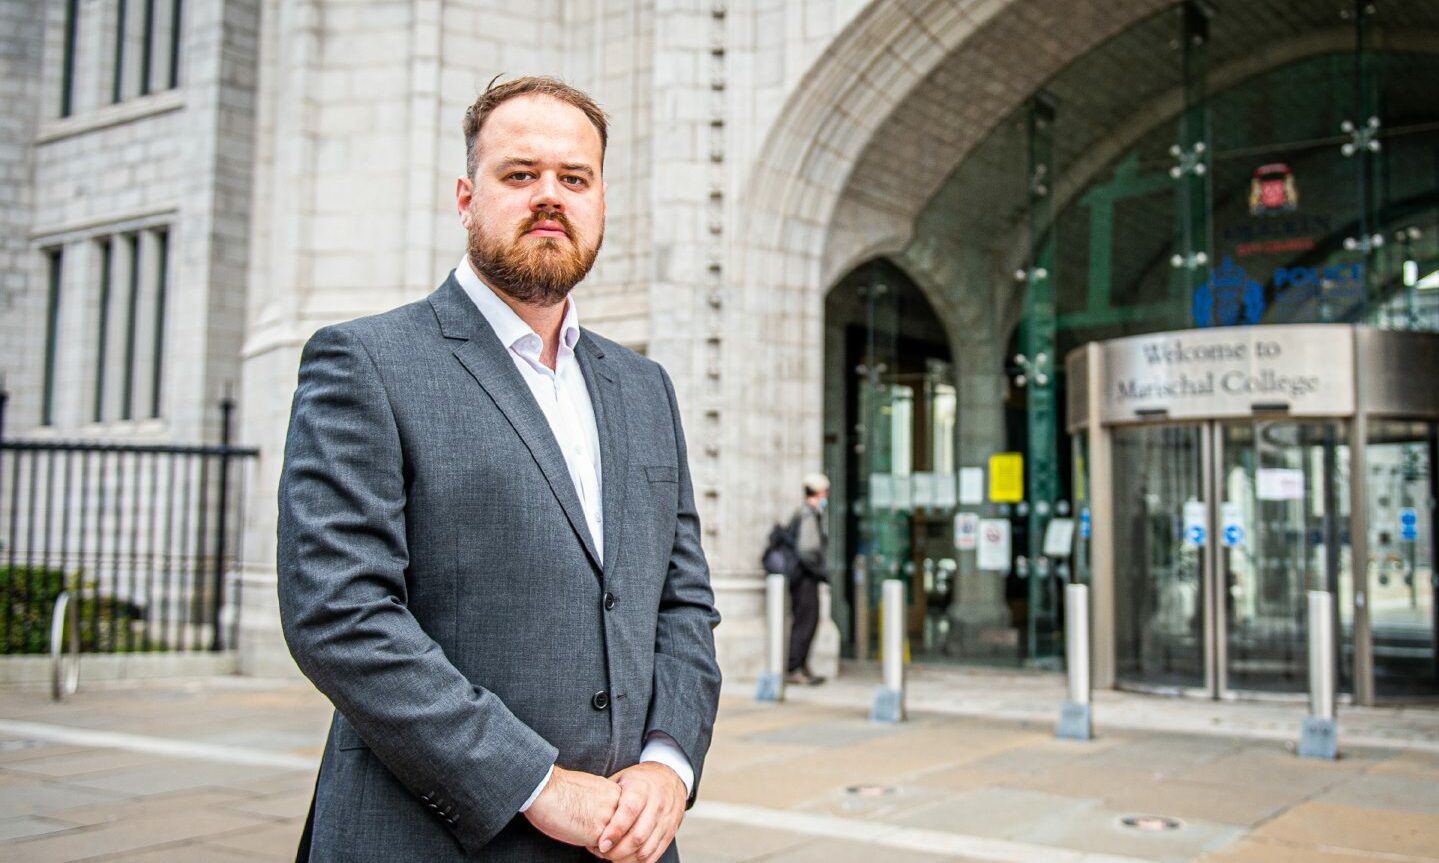 Finance convener Alex McLellan outside the council's Marischal College HQ, as bosses insist the Aberdeen budget survey was valid